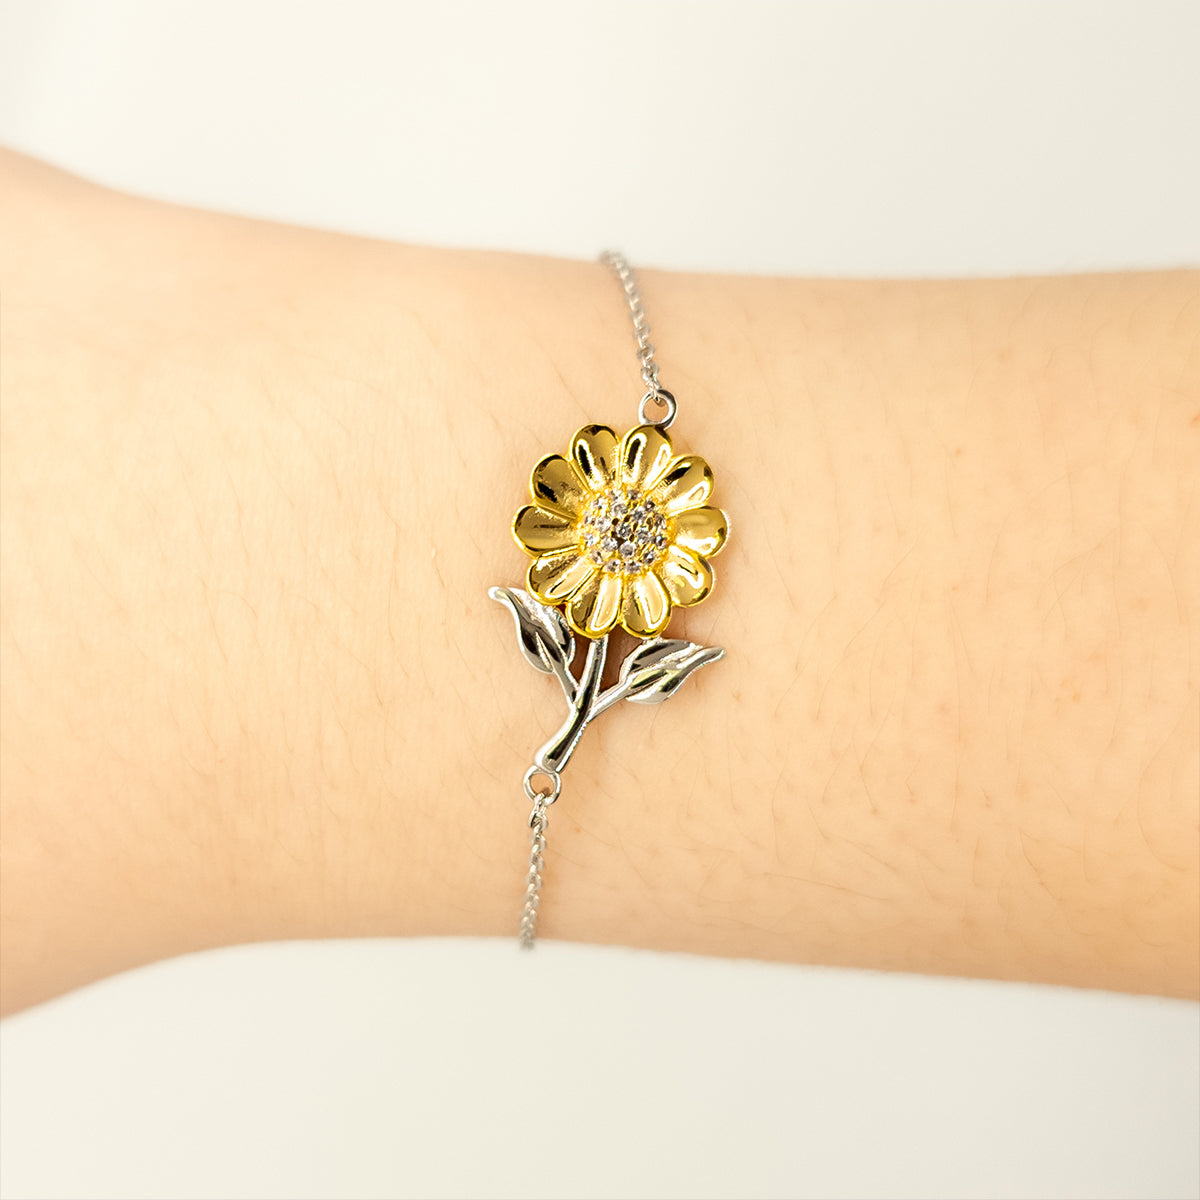 Funny Sonographer Mom Gifts, The best kind of MOM raises Sonographer, Birthday, Mother's Day, Cute Sunflower Bracelet for Sonographer Mom